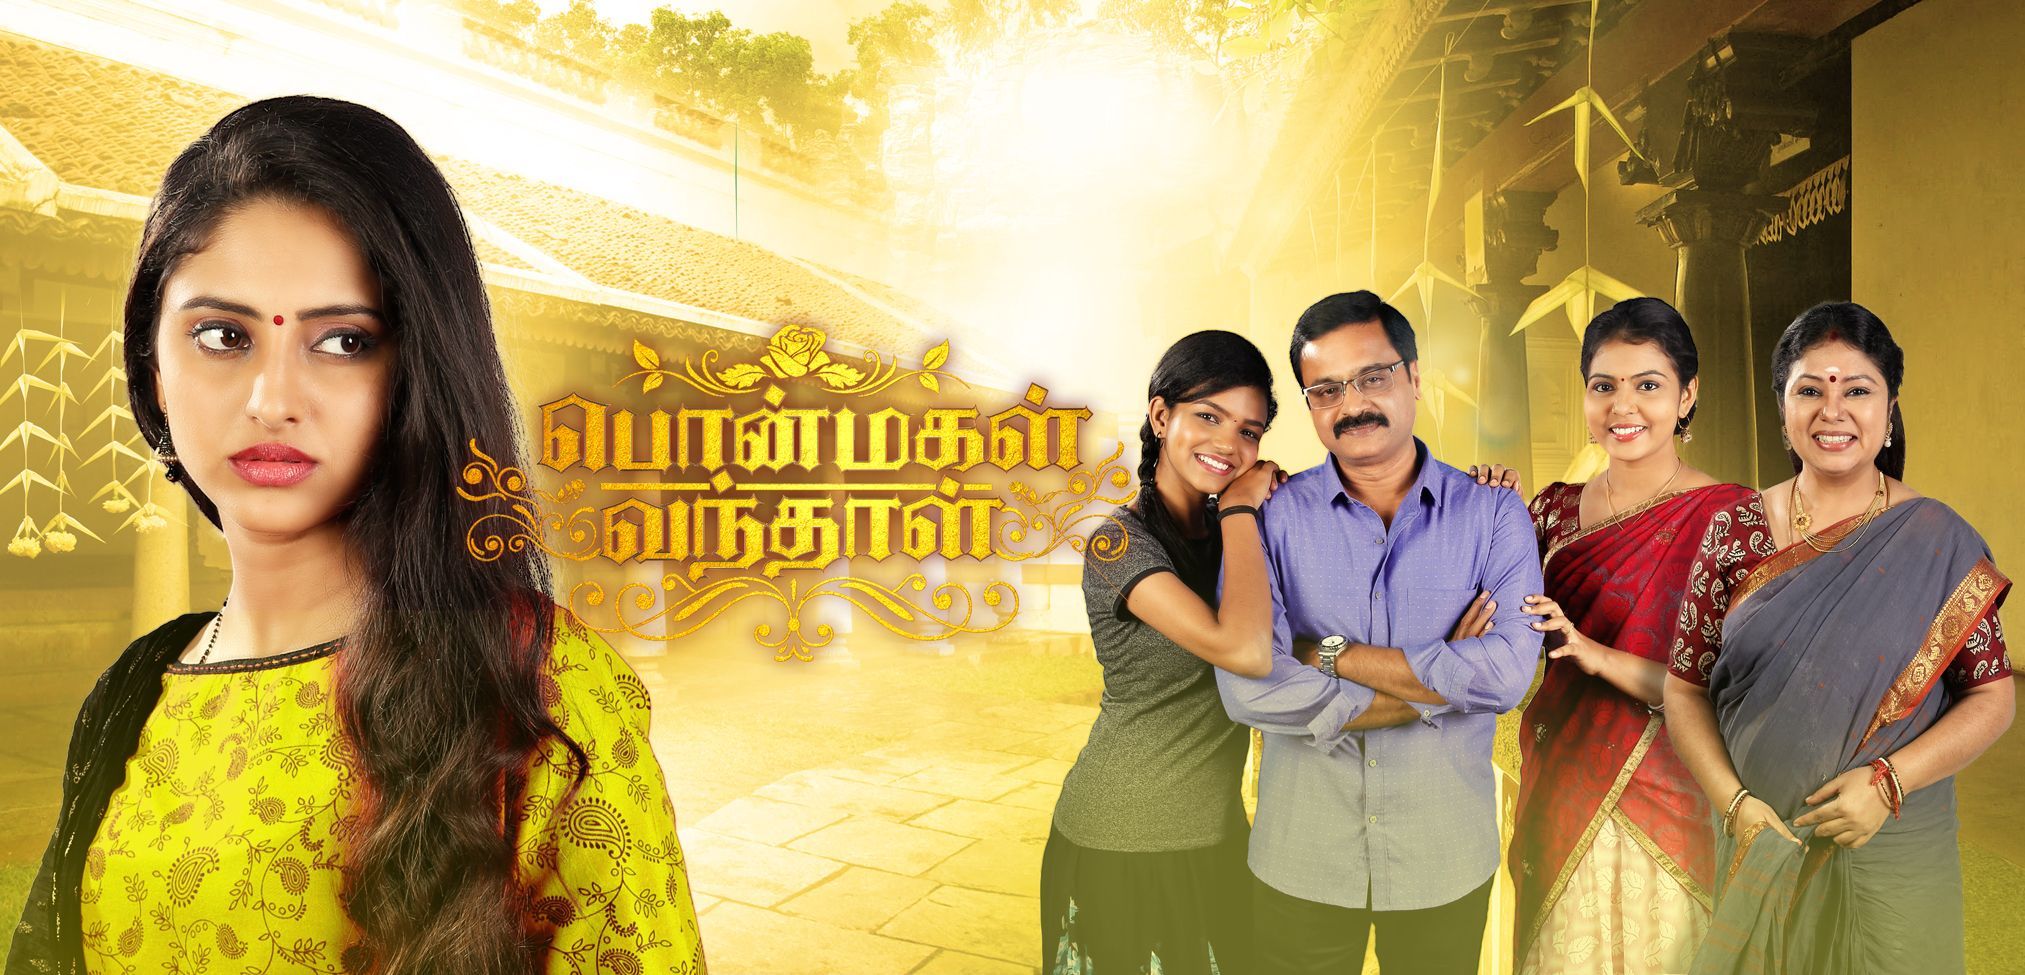 How to see vijay tv serials online - lifeter